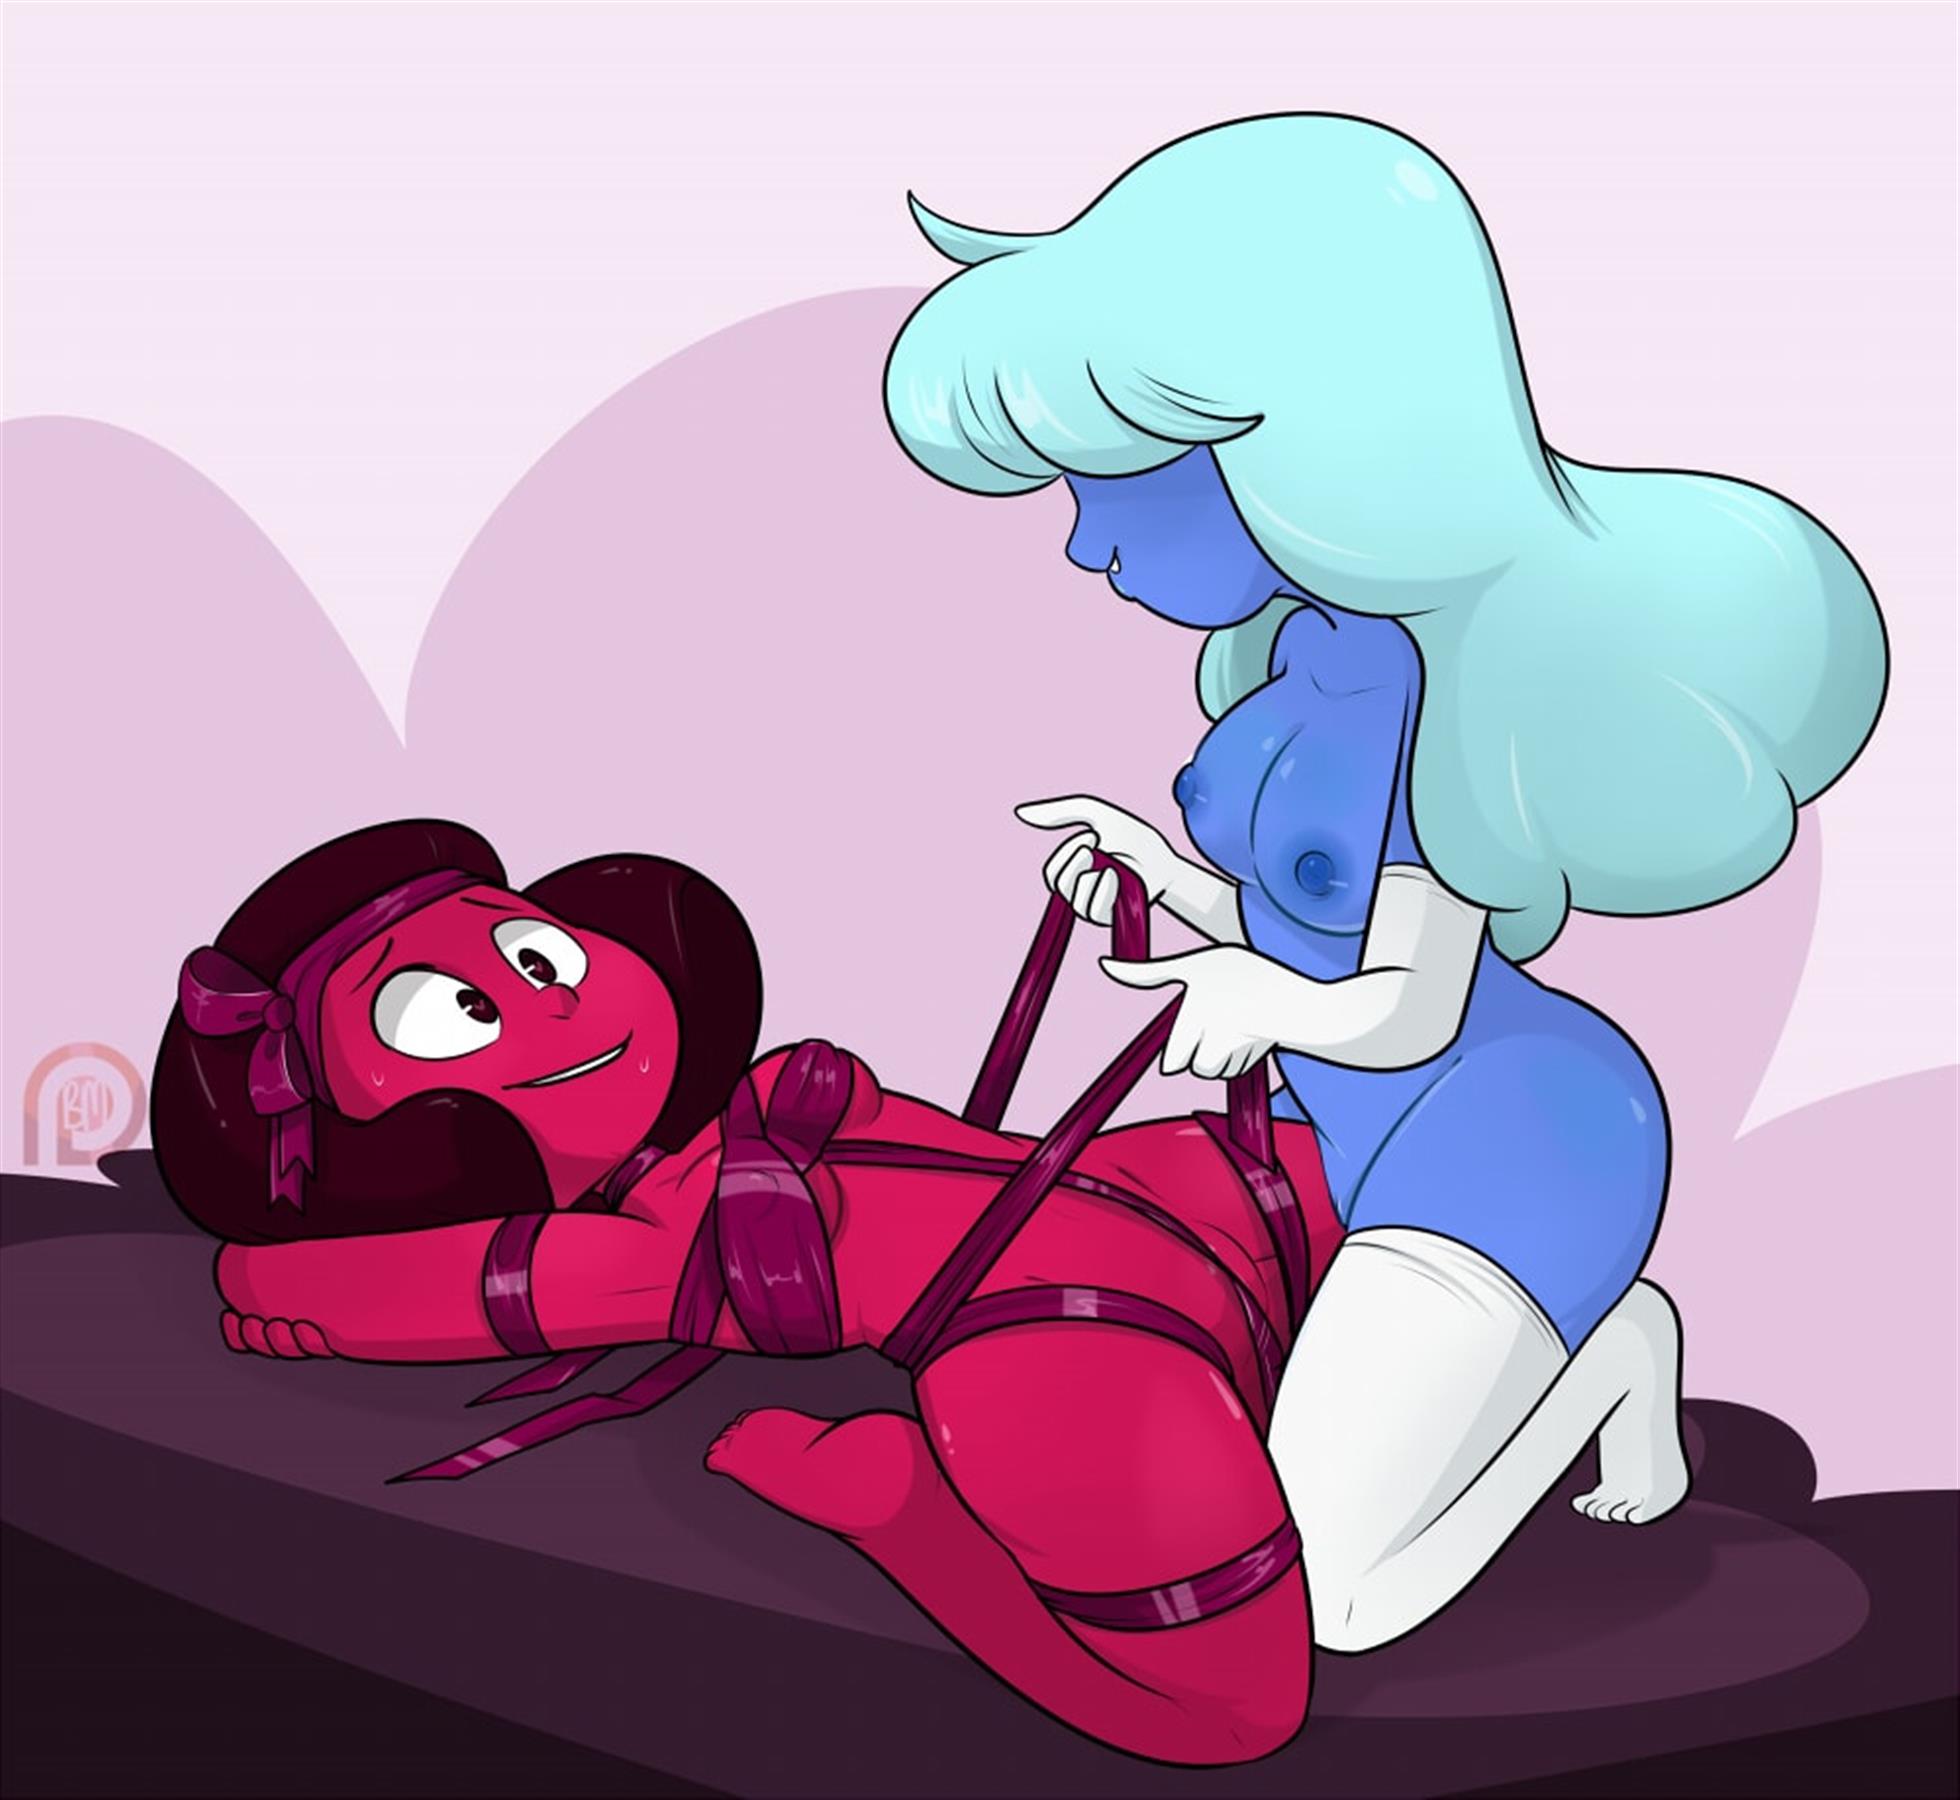 Steven Universe rule34 on Reddit. nude, plus that one human girl from the z...